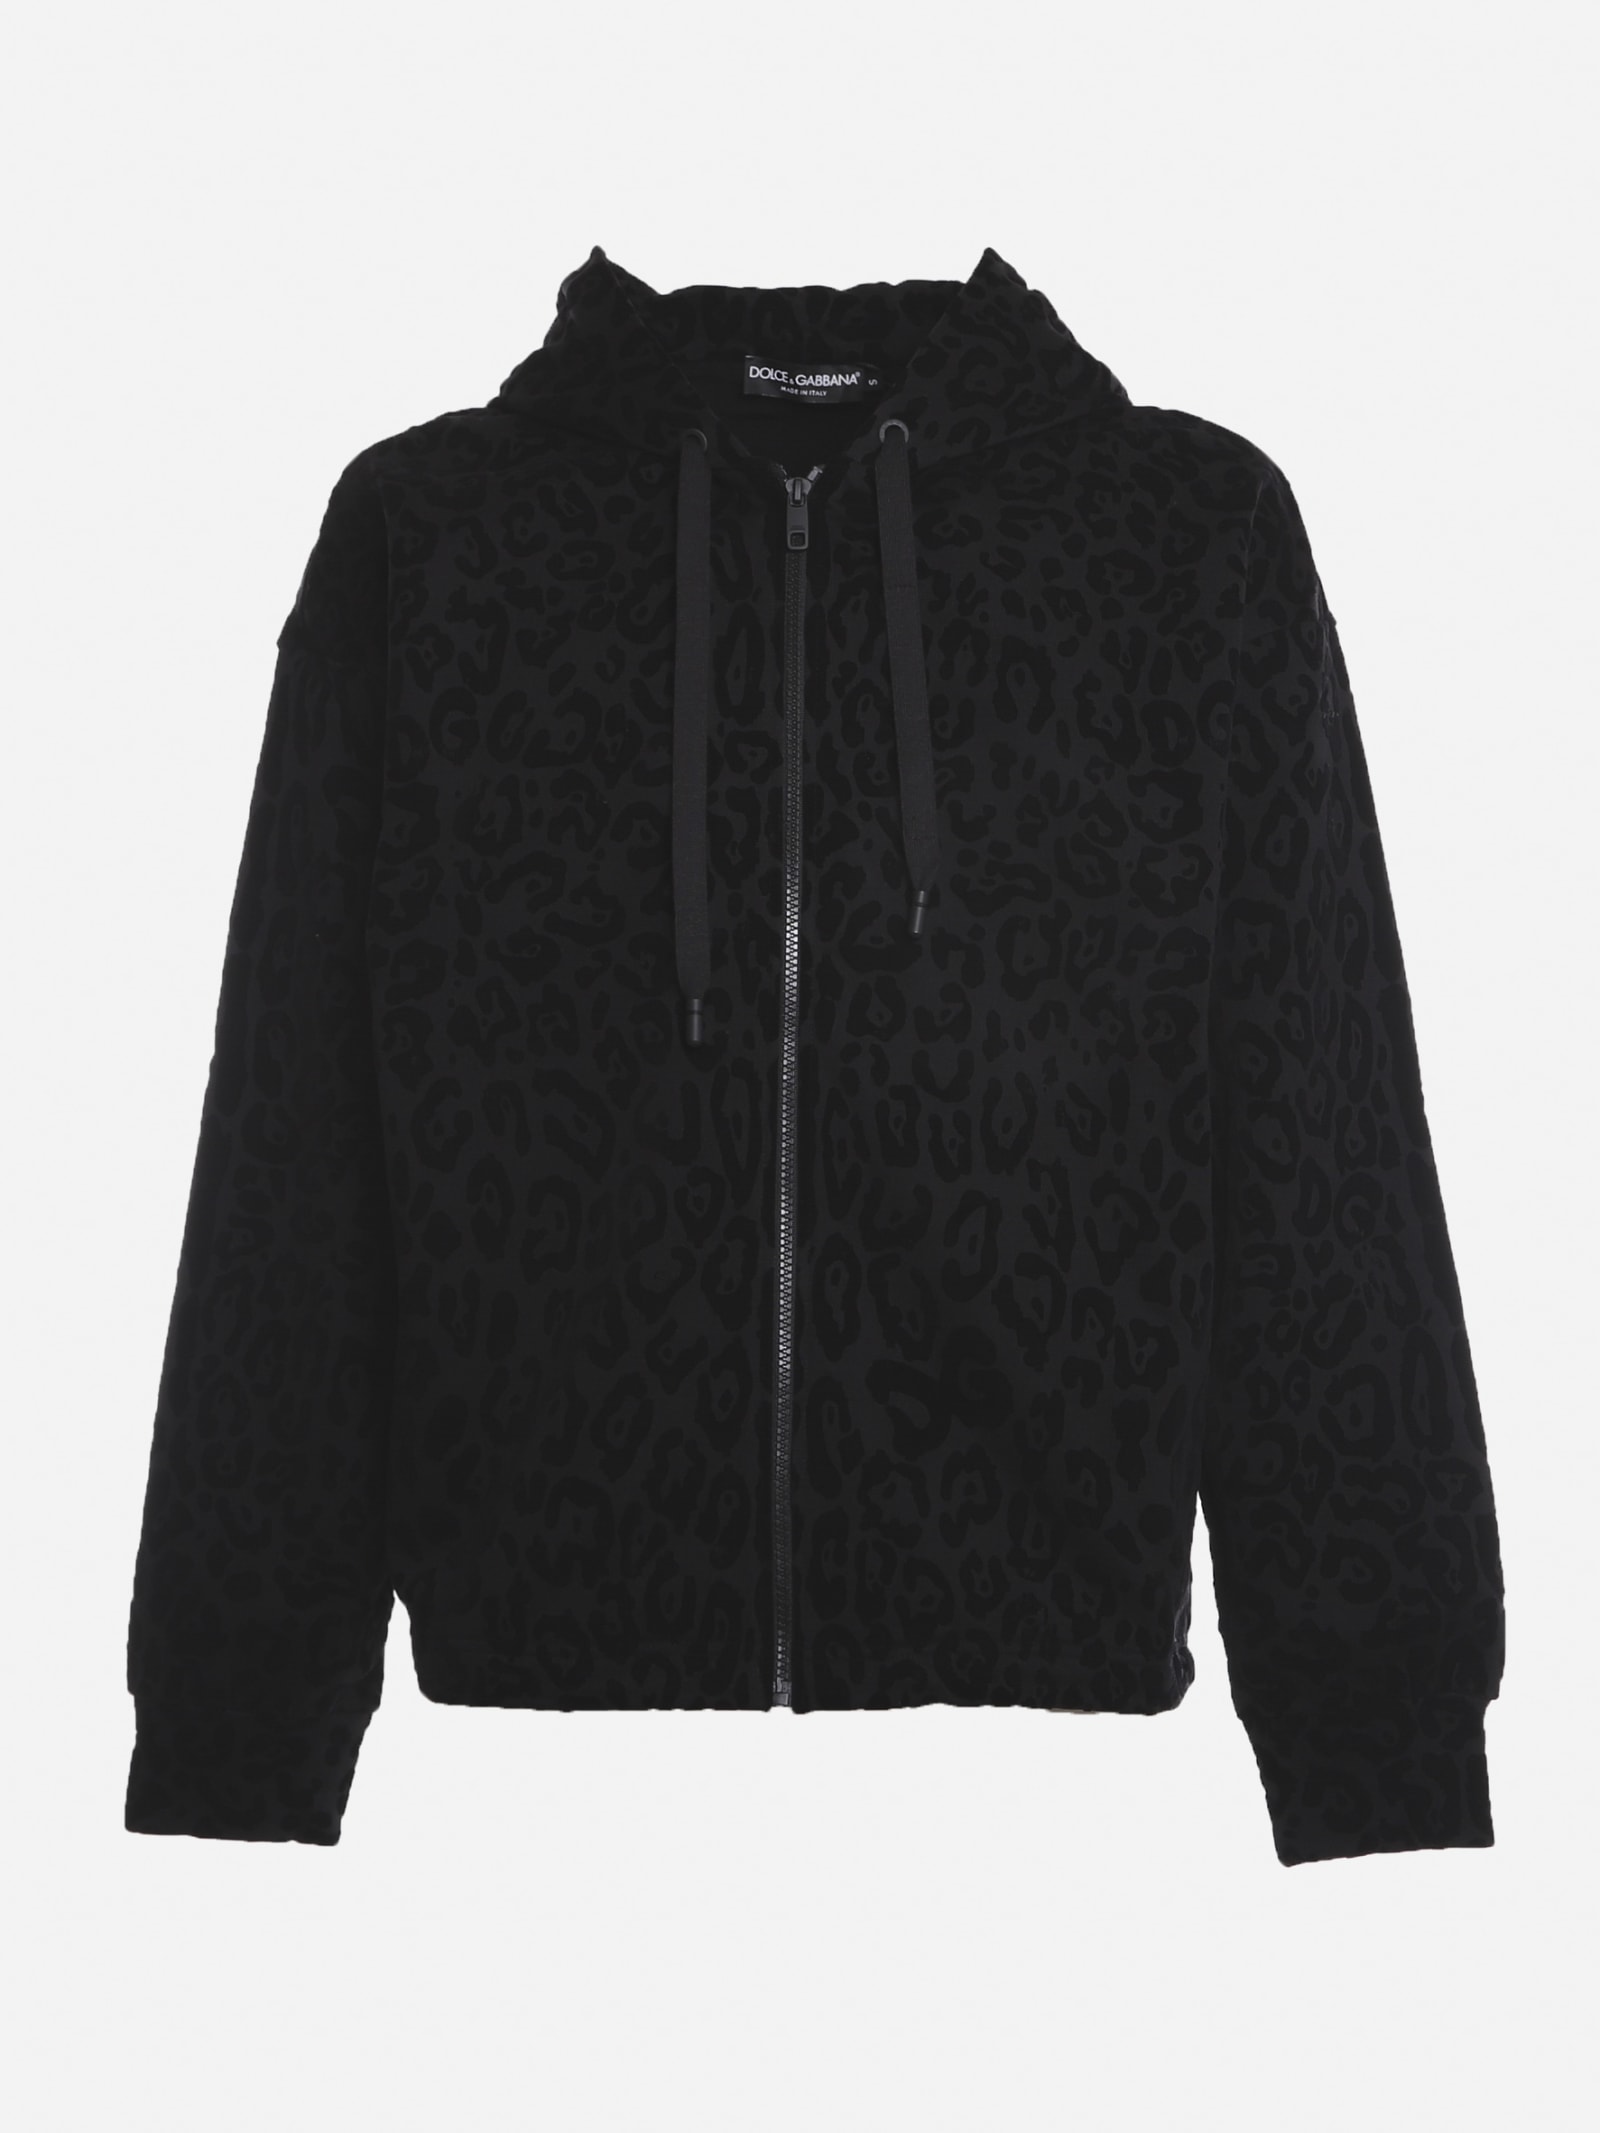 Dolce & Gabbana Cotton Sweatshirt With All-over Tone-on-tone Leopard Print